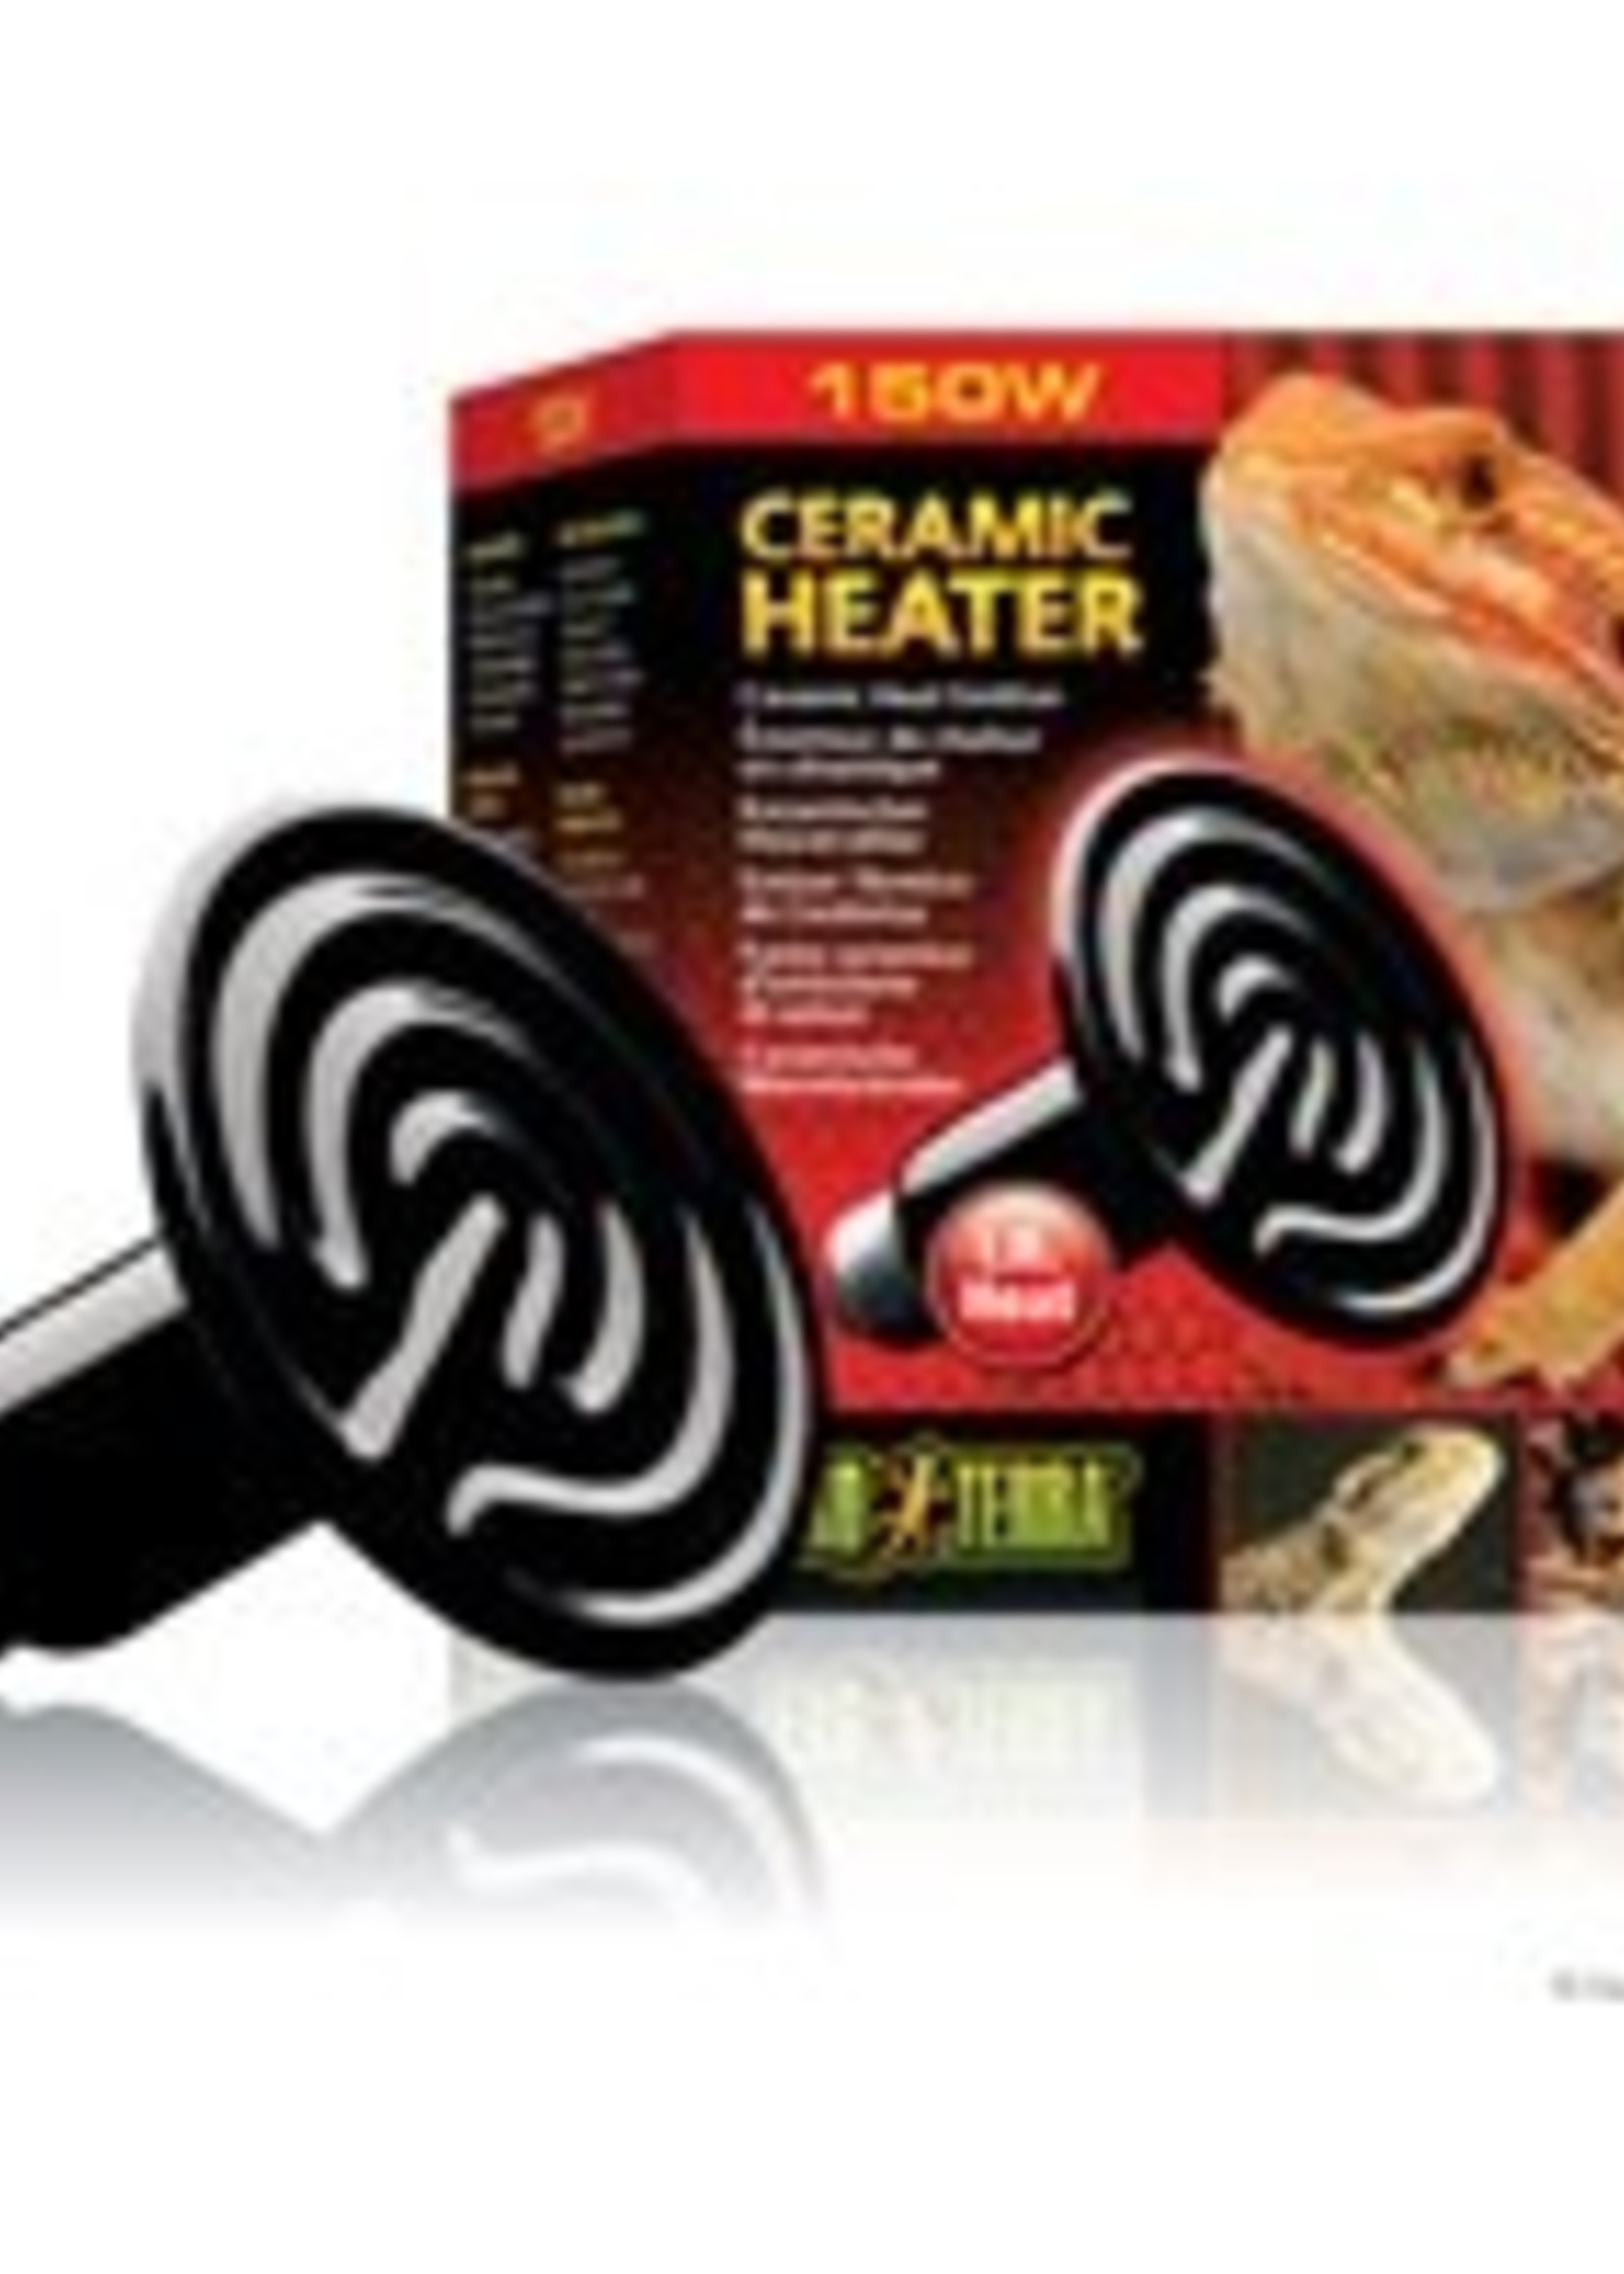 SPECIAL ORDER ONLY - Exo Terra Ceramic Heater - 150 W